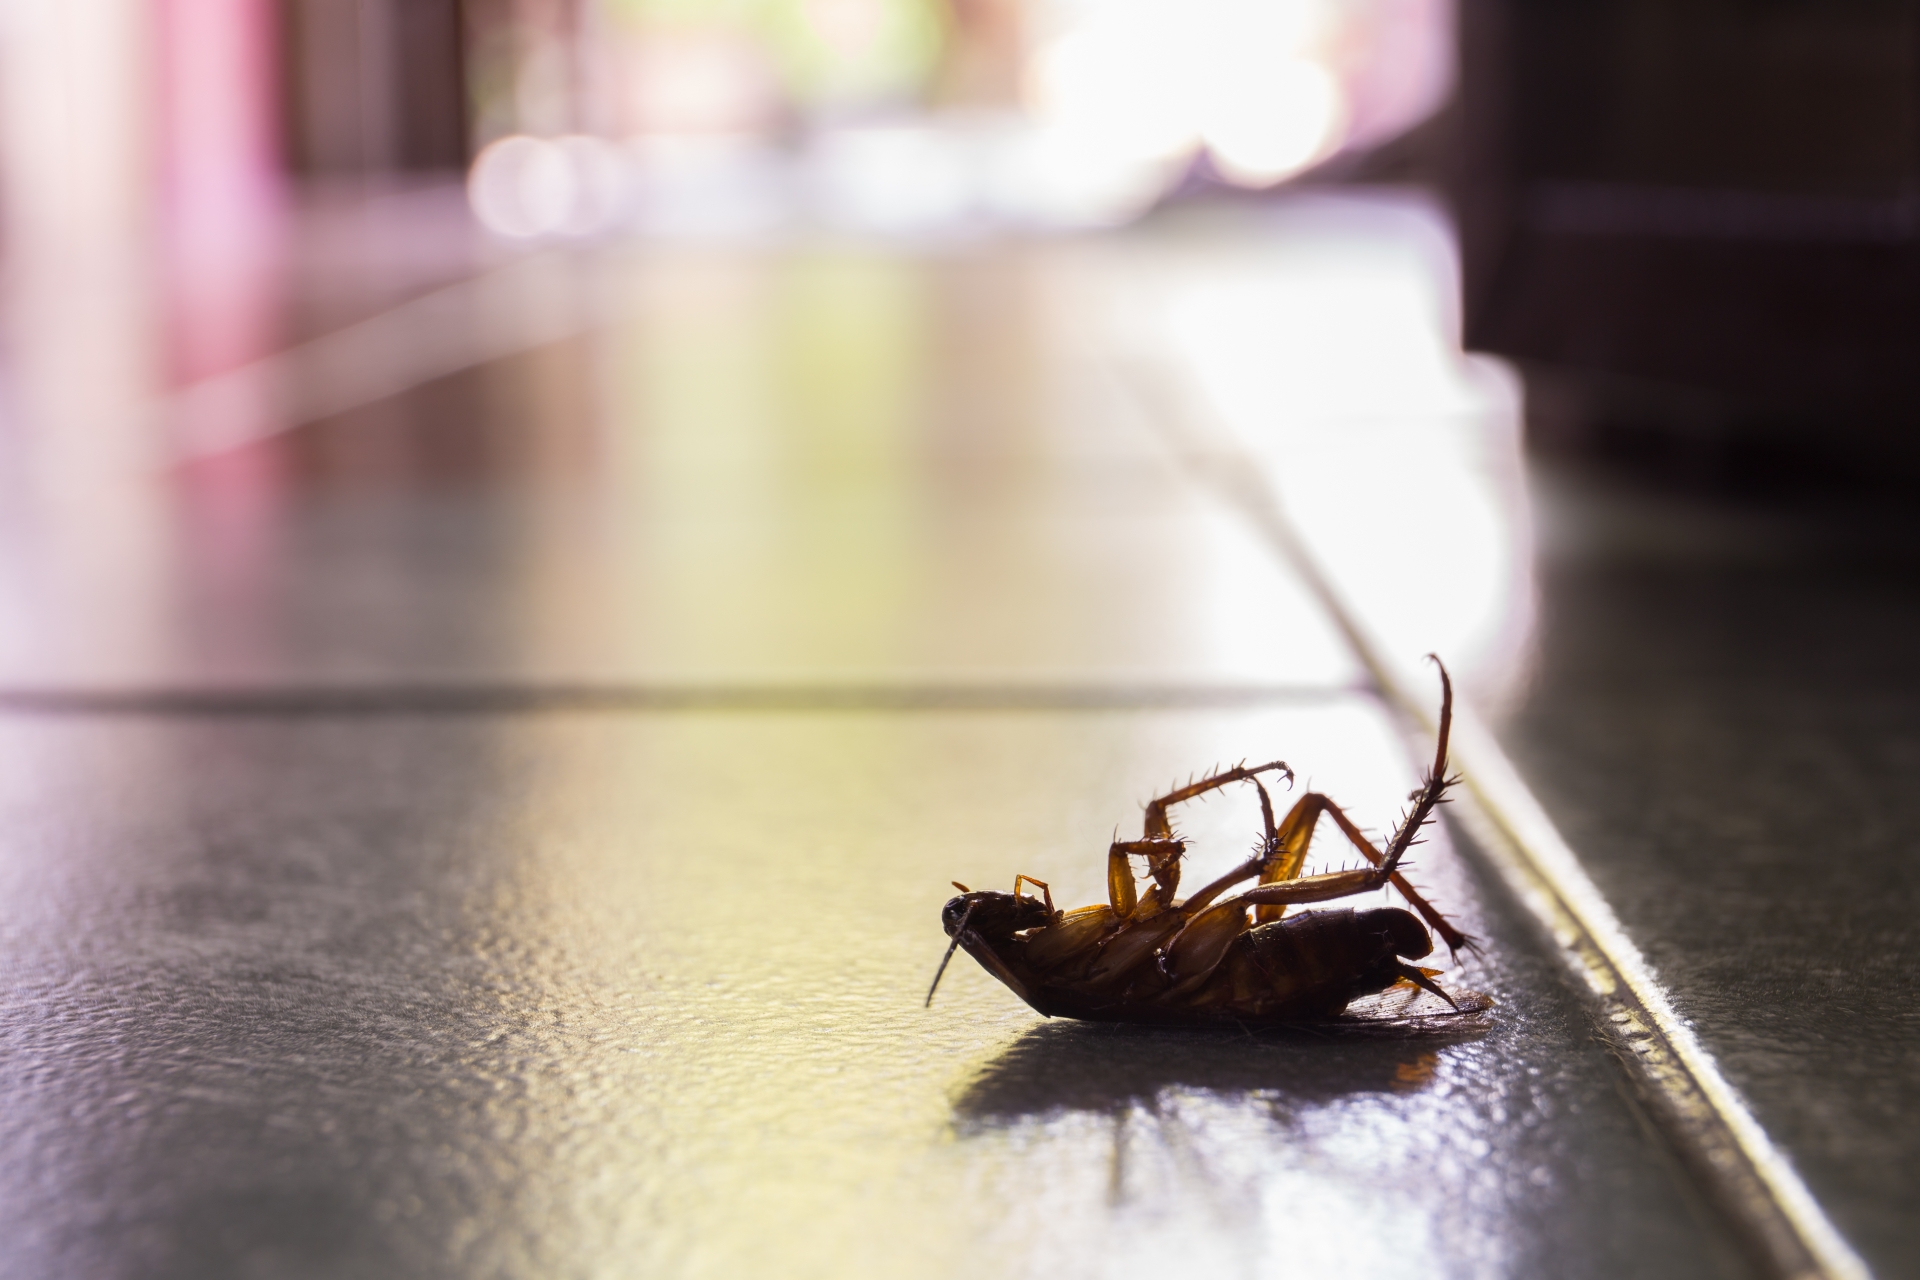 Cockroach Control, Pest Control in London. Call Now 020 3519 0469